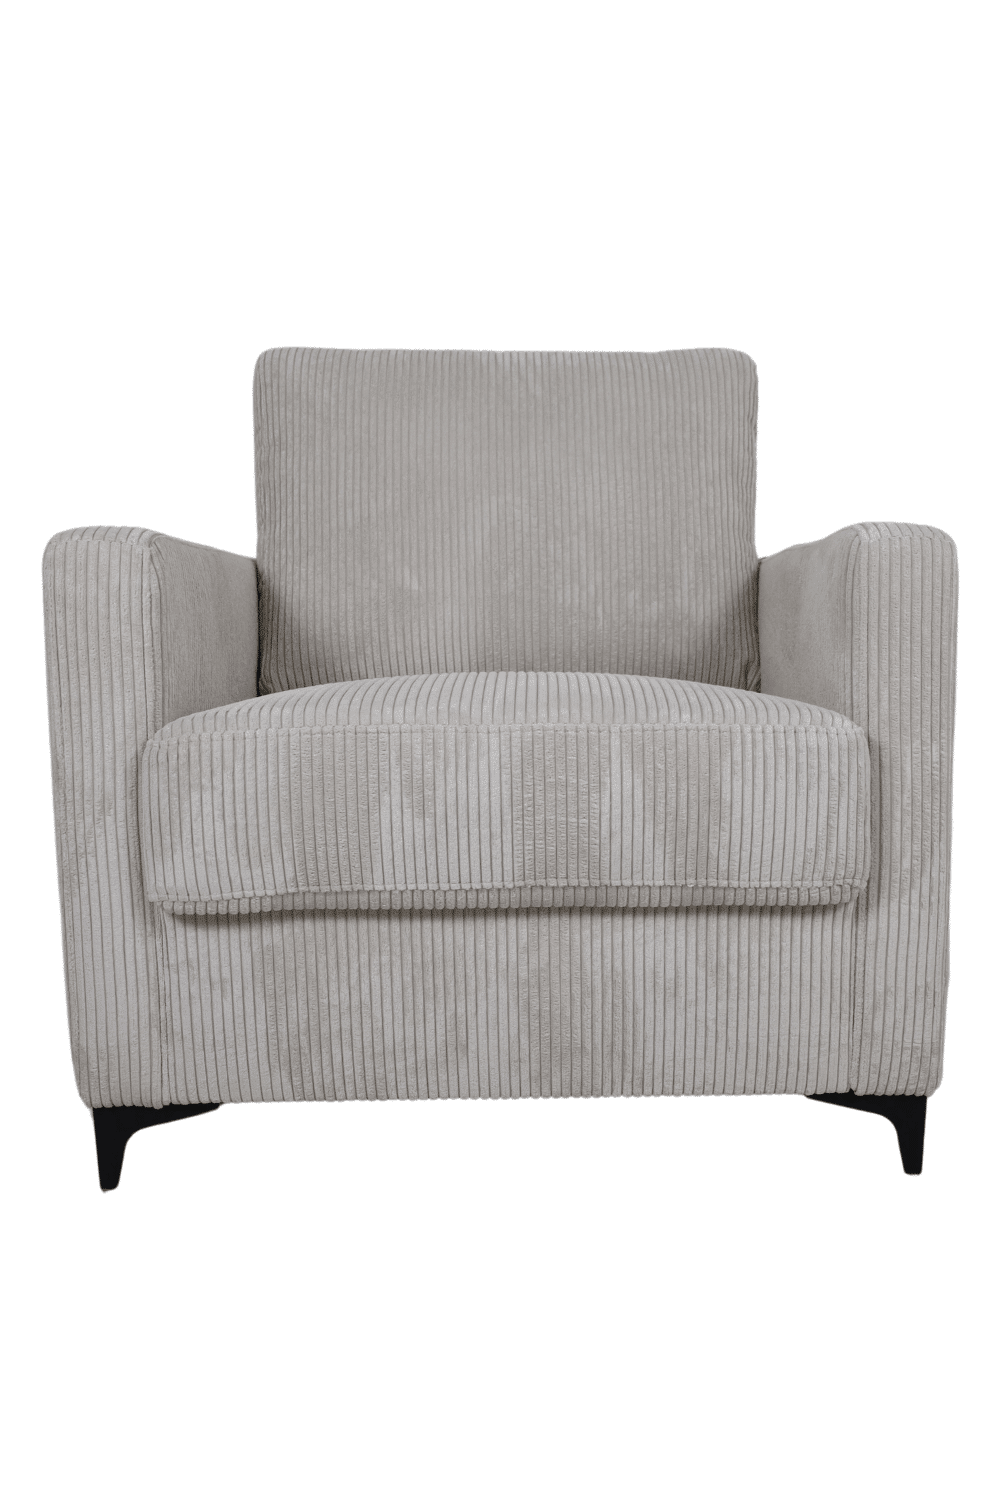 grote fauteuil ribstof